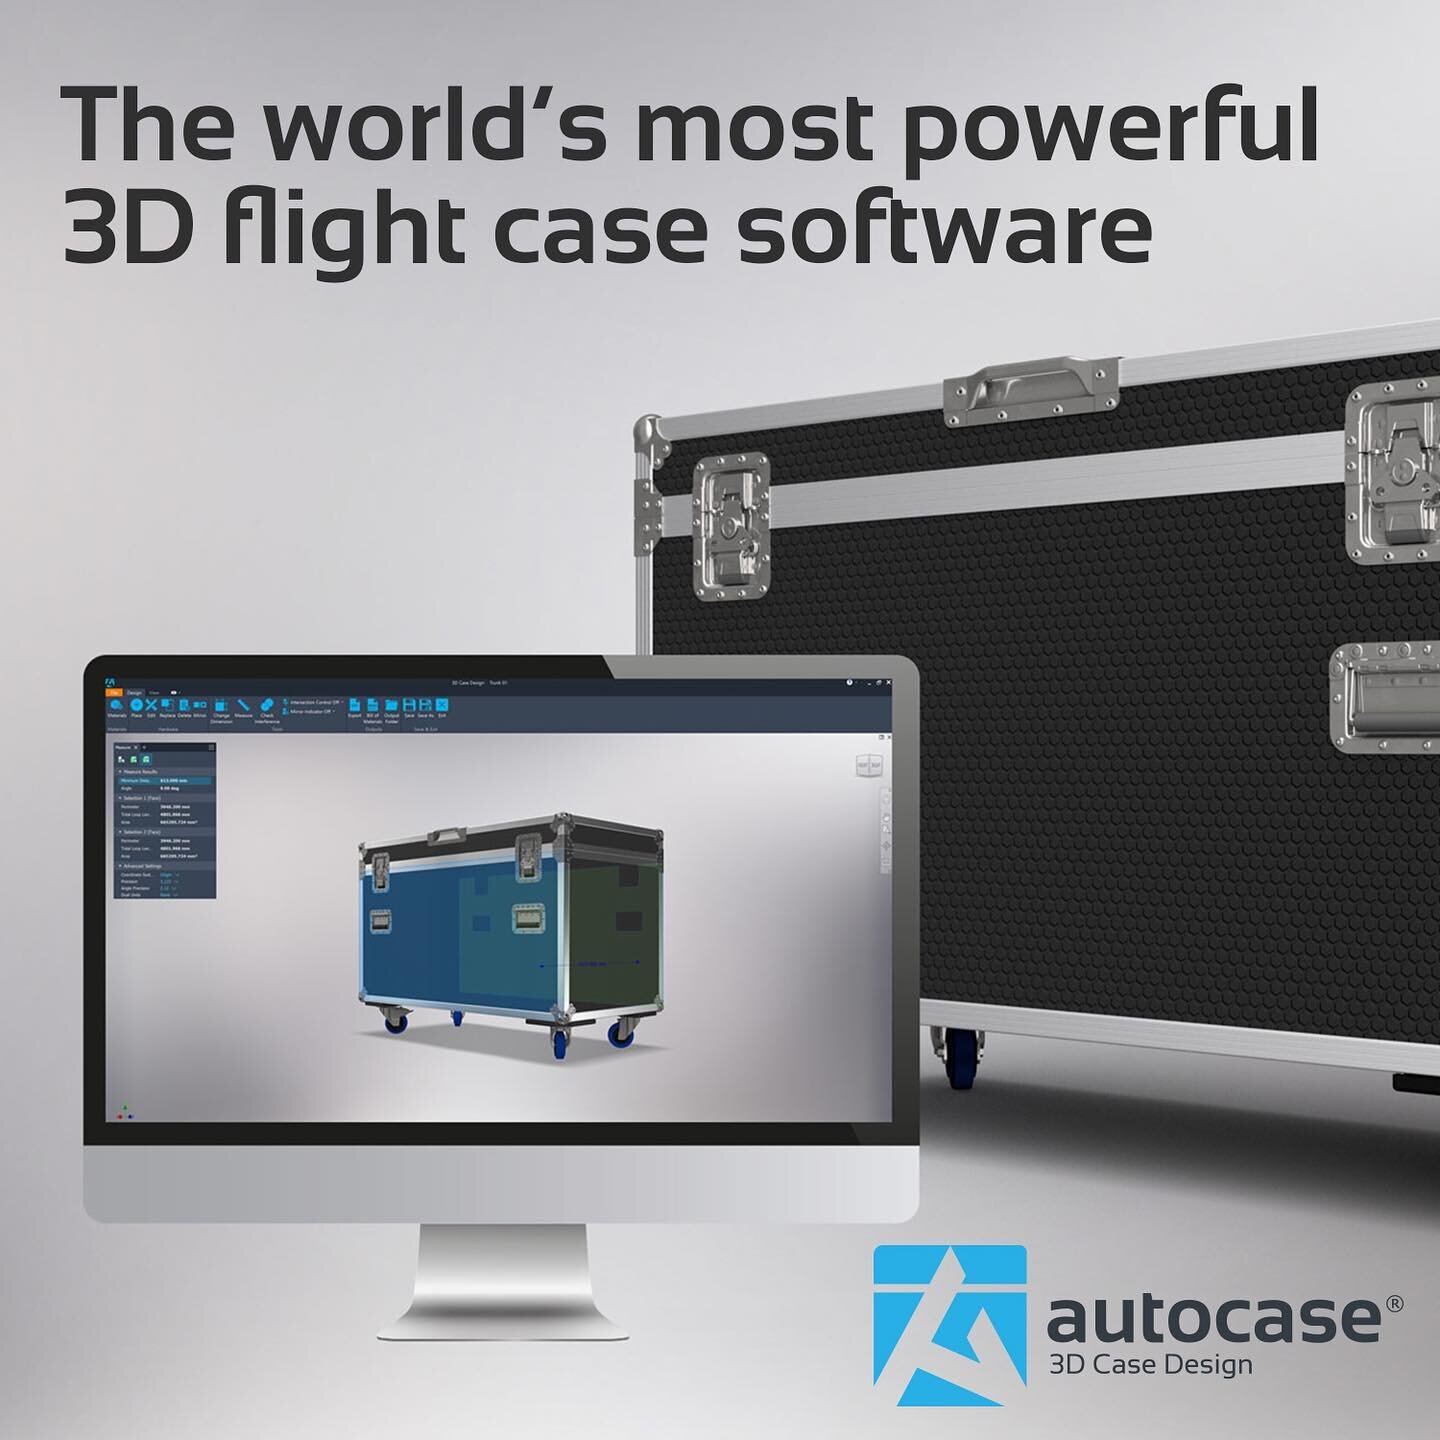 Autocase will be available by spring 2021. Visit our website and register your interest. 
.

.
.
.
#flightcase #flightcases #software #cad #autodesk #autocase #3ddesign